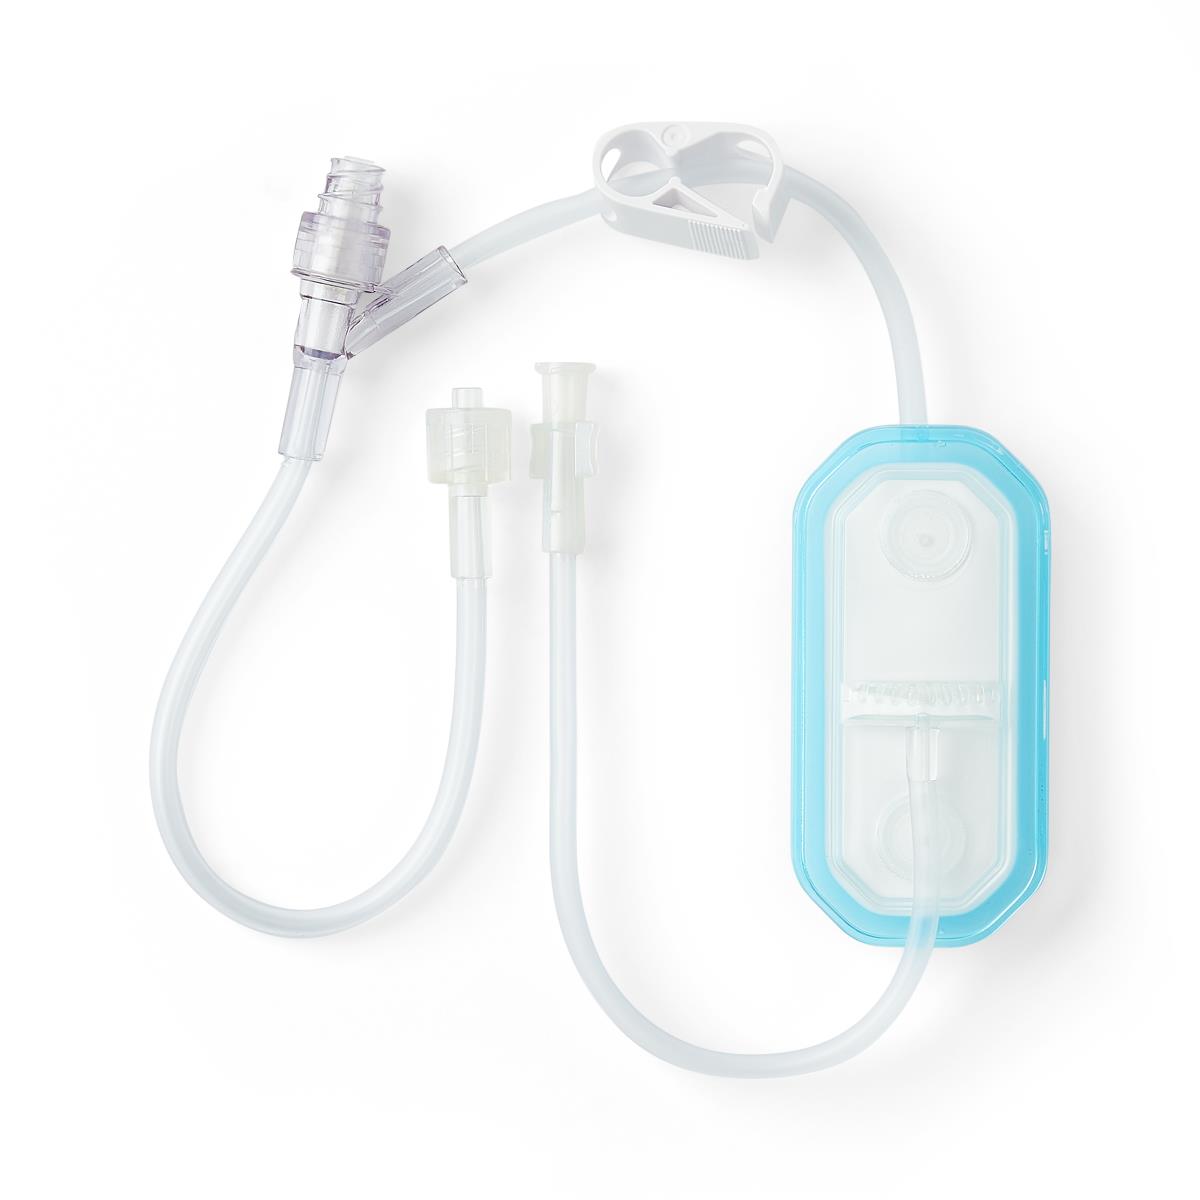 IV Extension Set 10 Inch Tubing With Filter Sterile